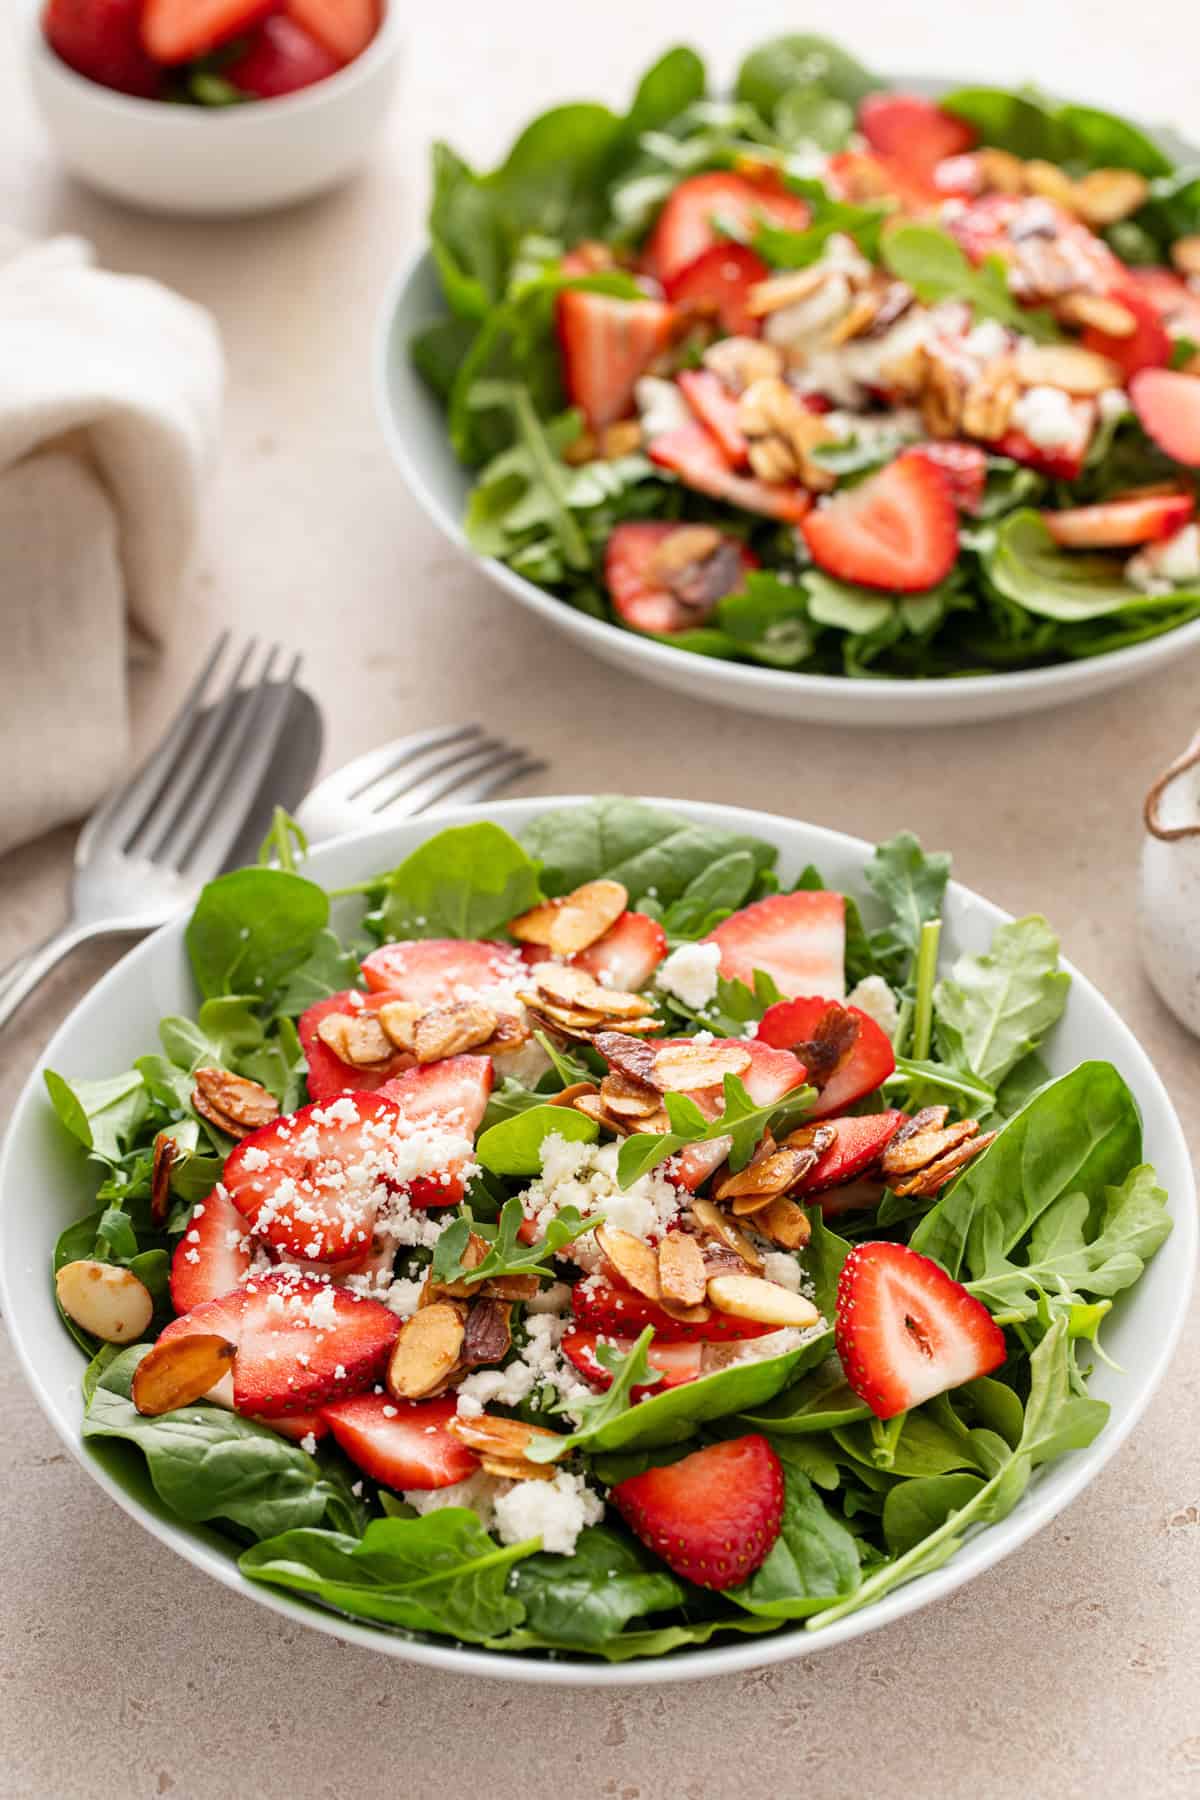 Two small bowls each holding a serving of fresh strawberry salad.